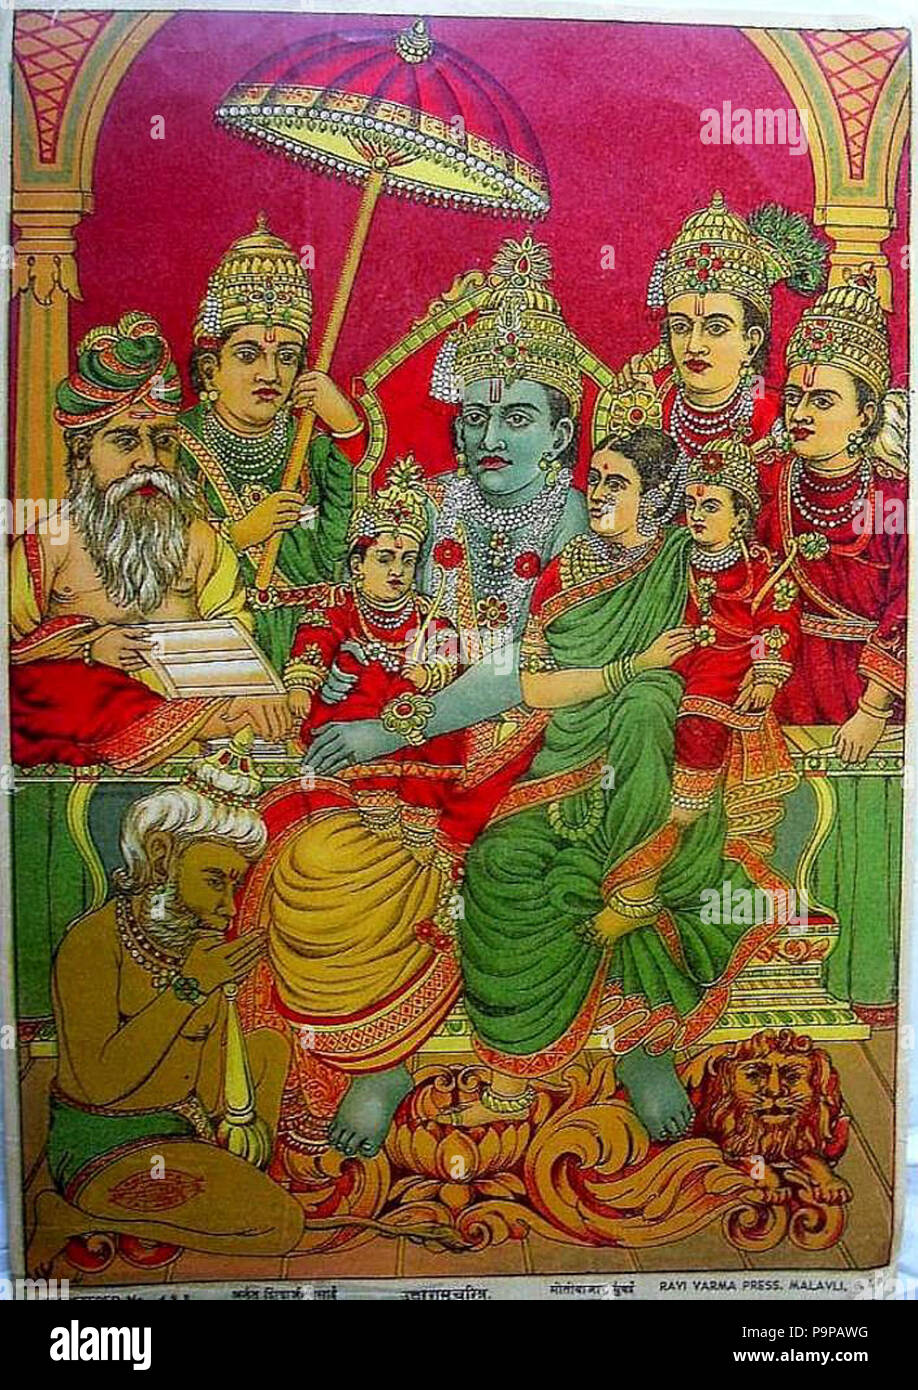 A more elaborate view, also from the Ravi Varma Press, 1910's. Stock Photo